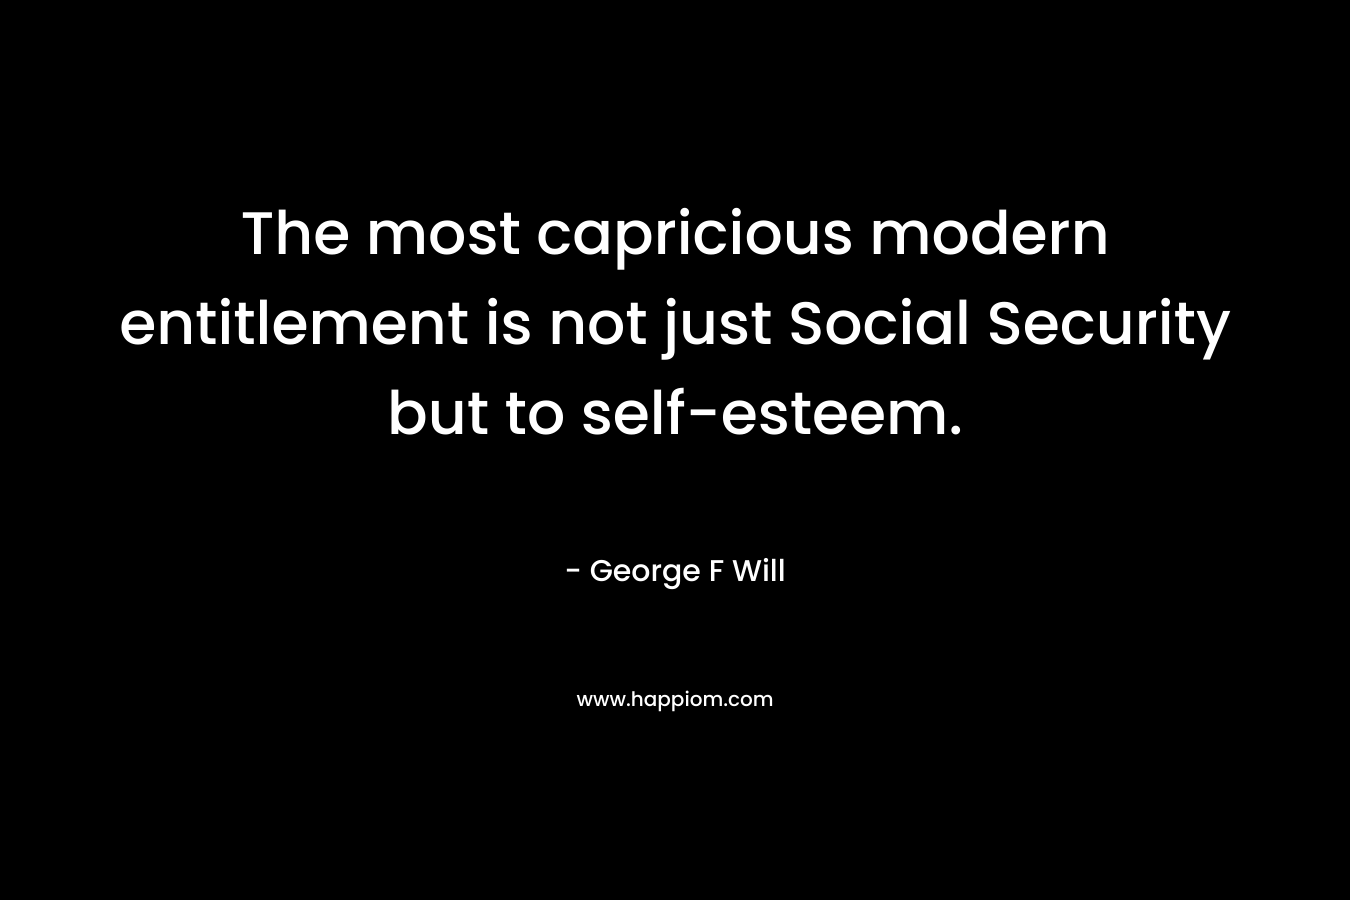 The most capricious modern entitlement is not just Social Security but to self-esteem.